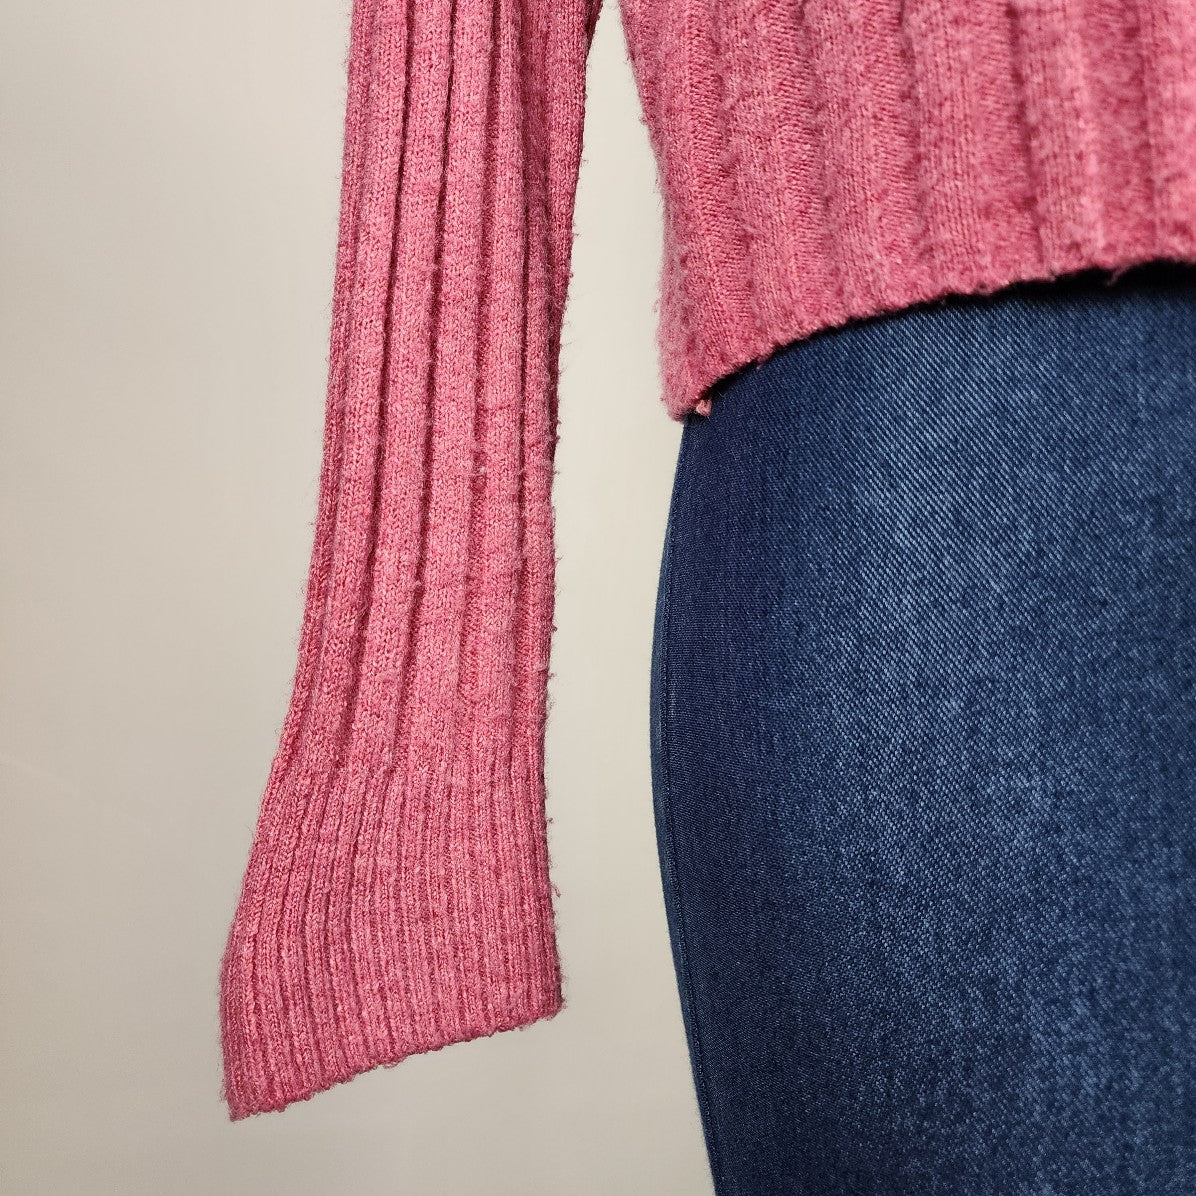 American Eagle Pink Knitted Sweater Size Size XS/S